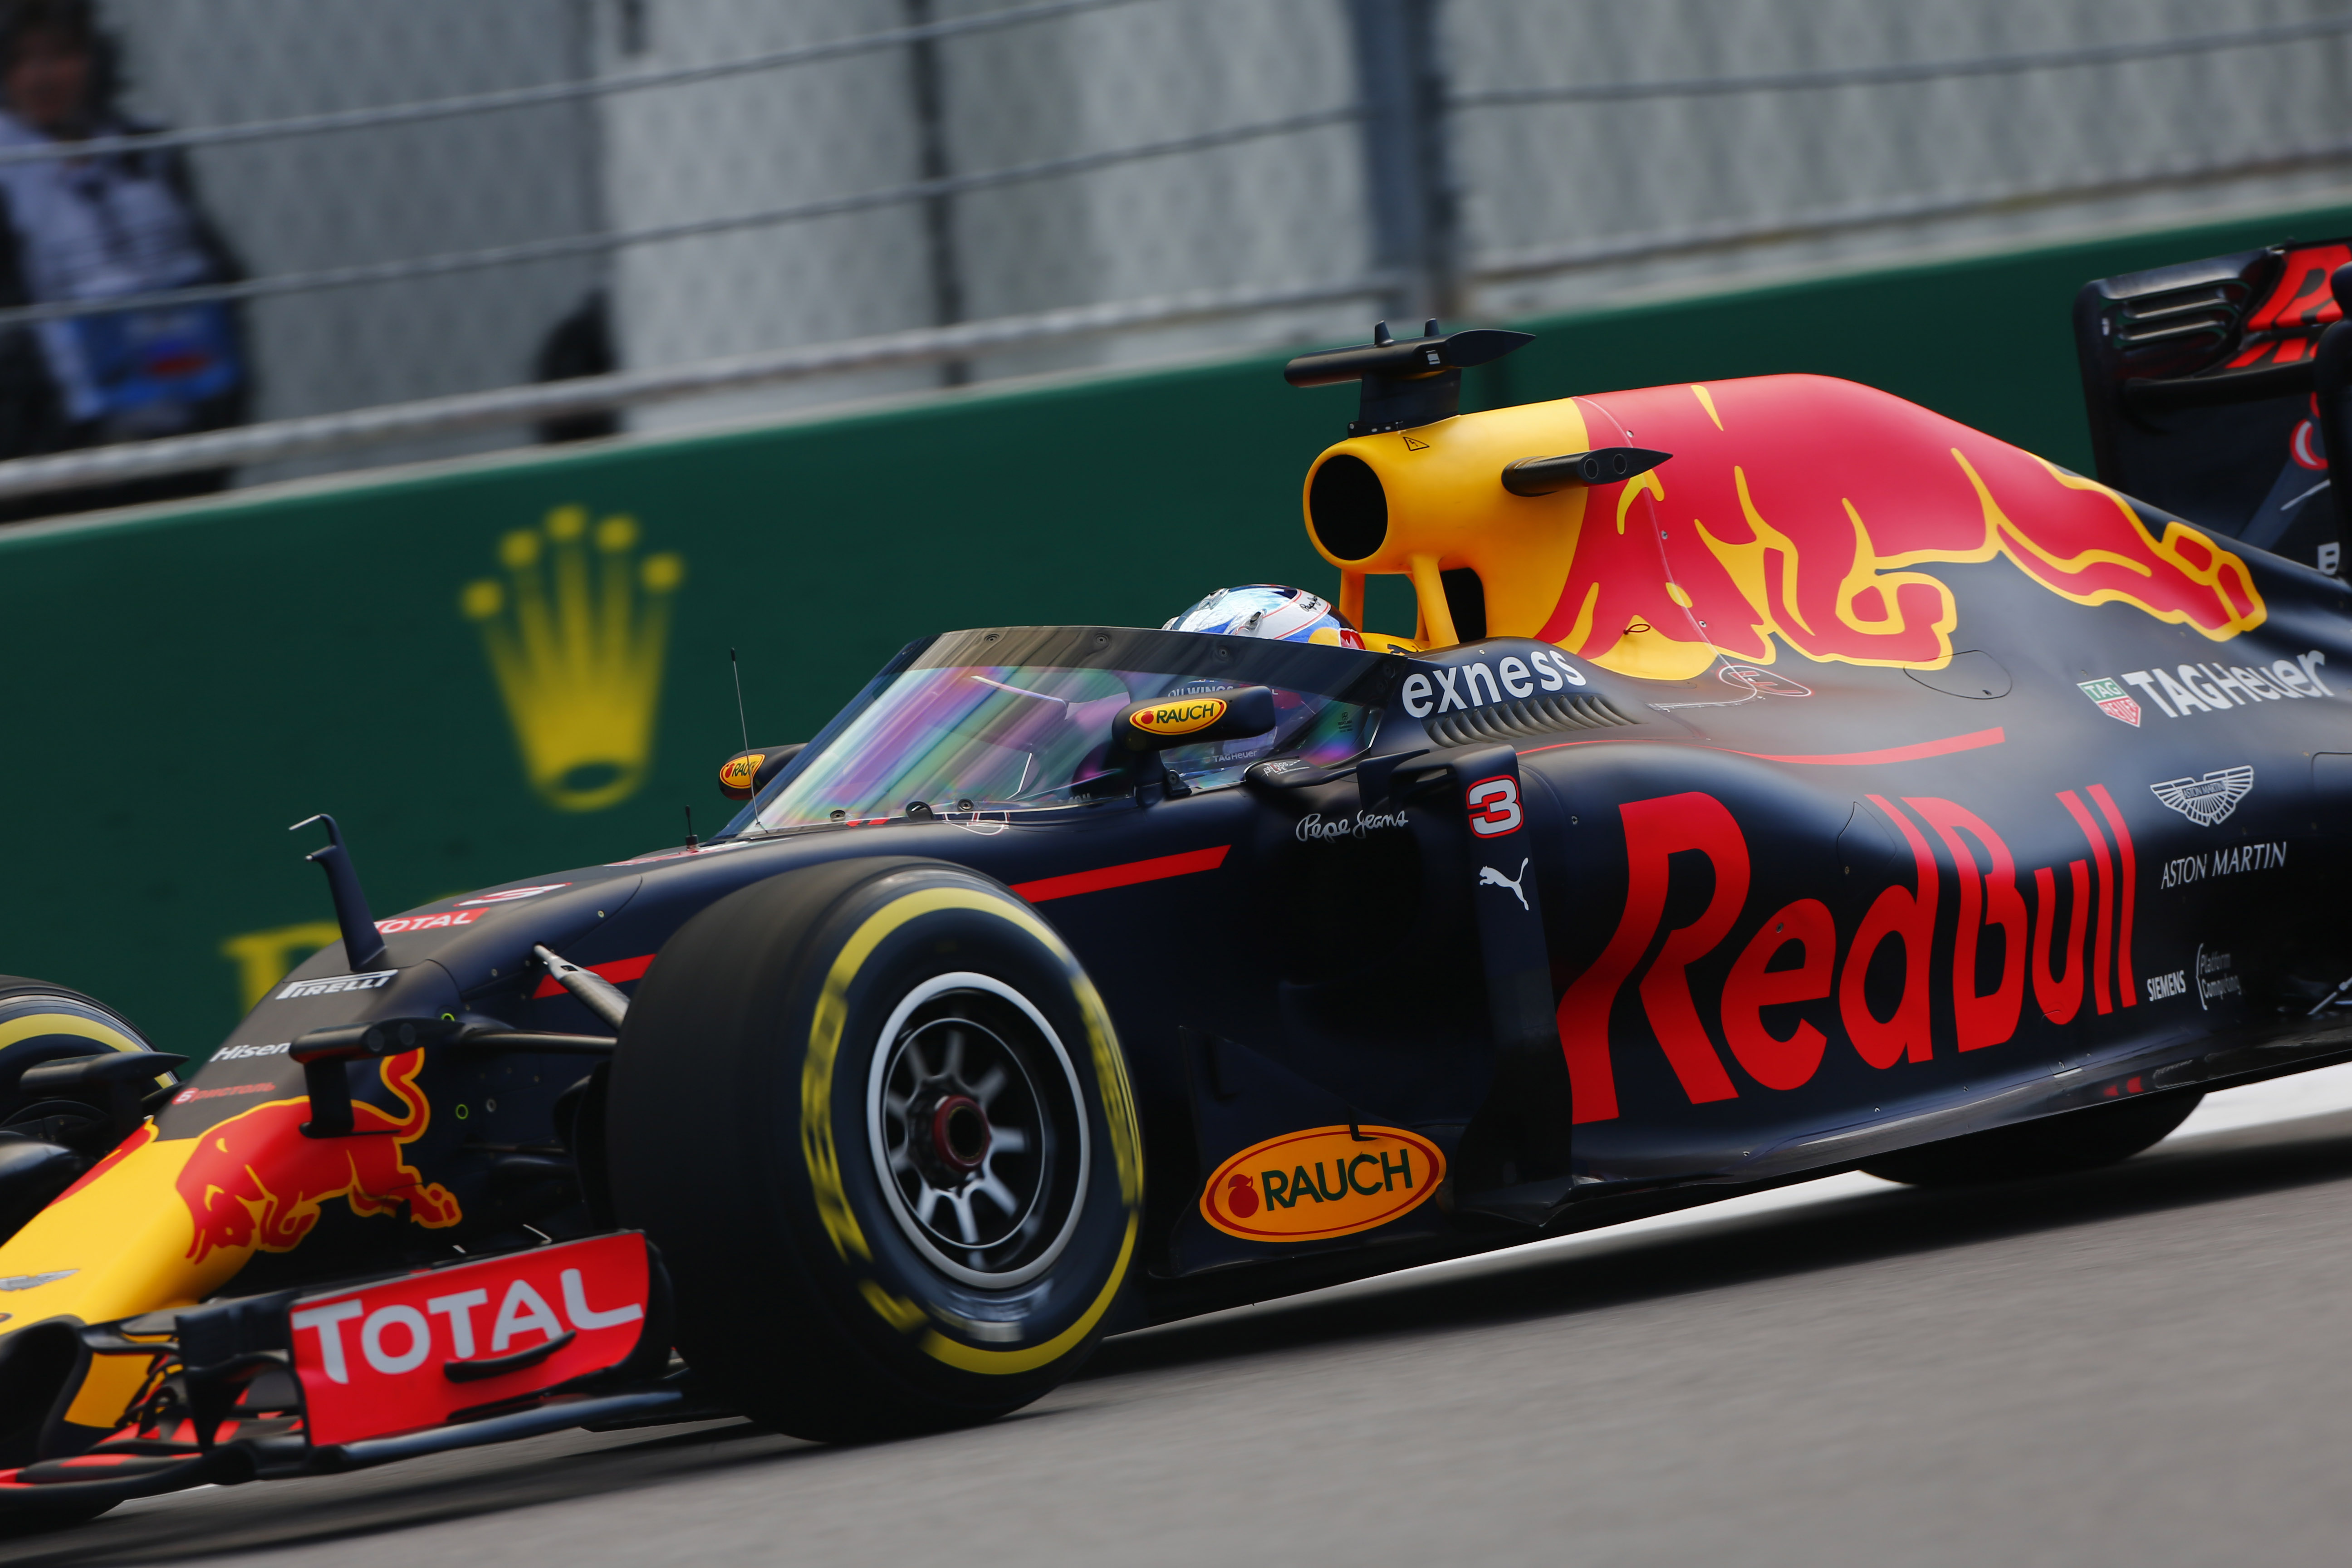 F1 - Red Bull tests 'Aeroscreen' head protection system at Sochi | Federation Internationale l'Automobile